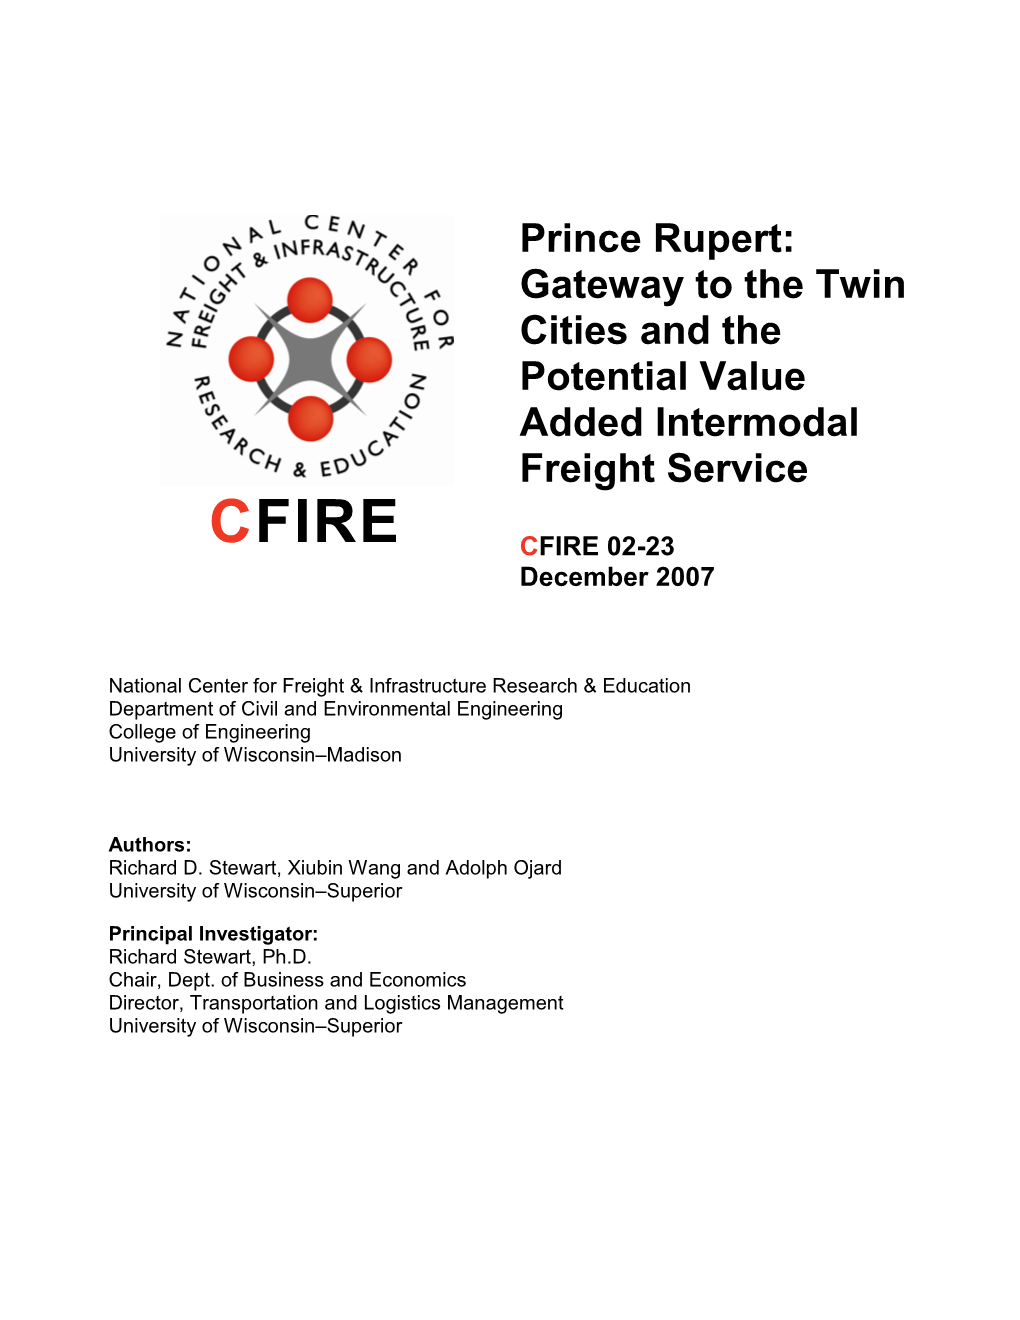 Prince Rupert: Gateway to the Twin Cities and the Potential Value Added Intermodal Freight Service